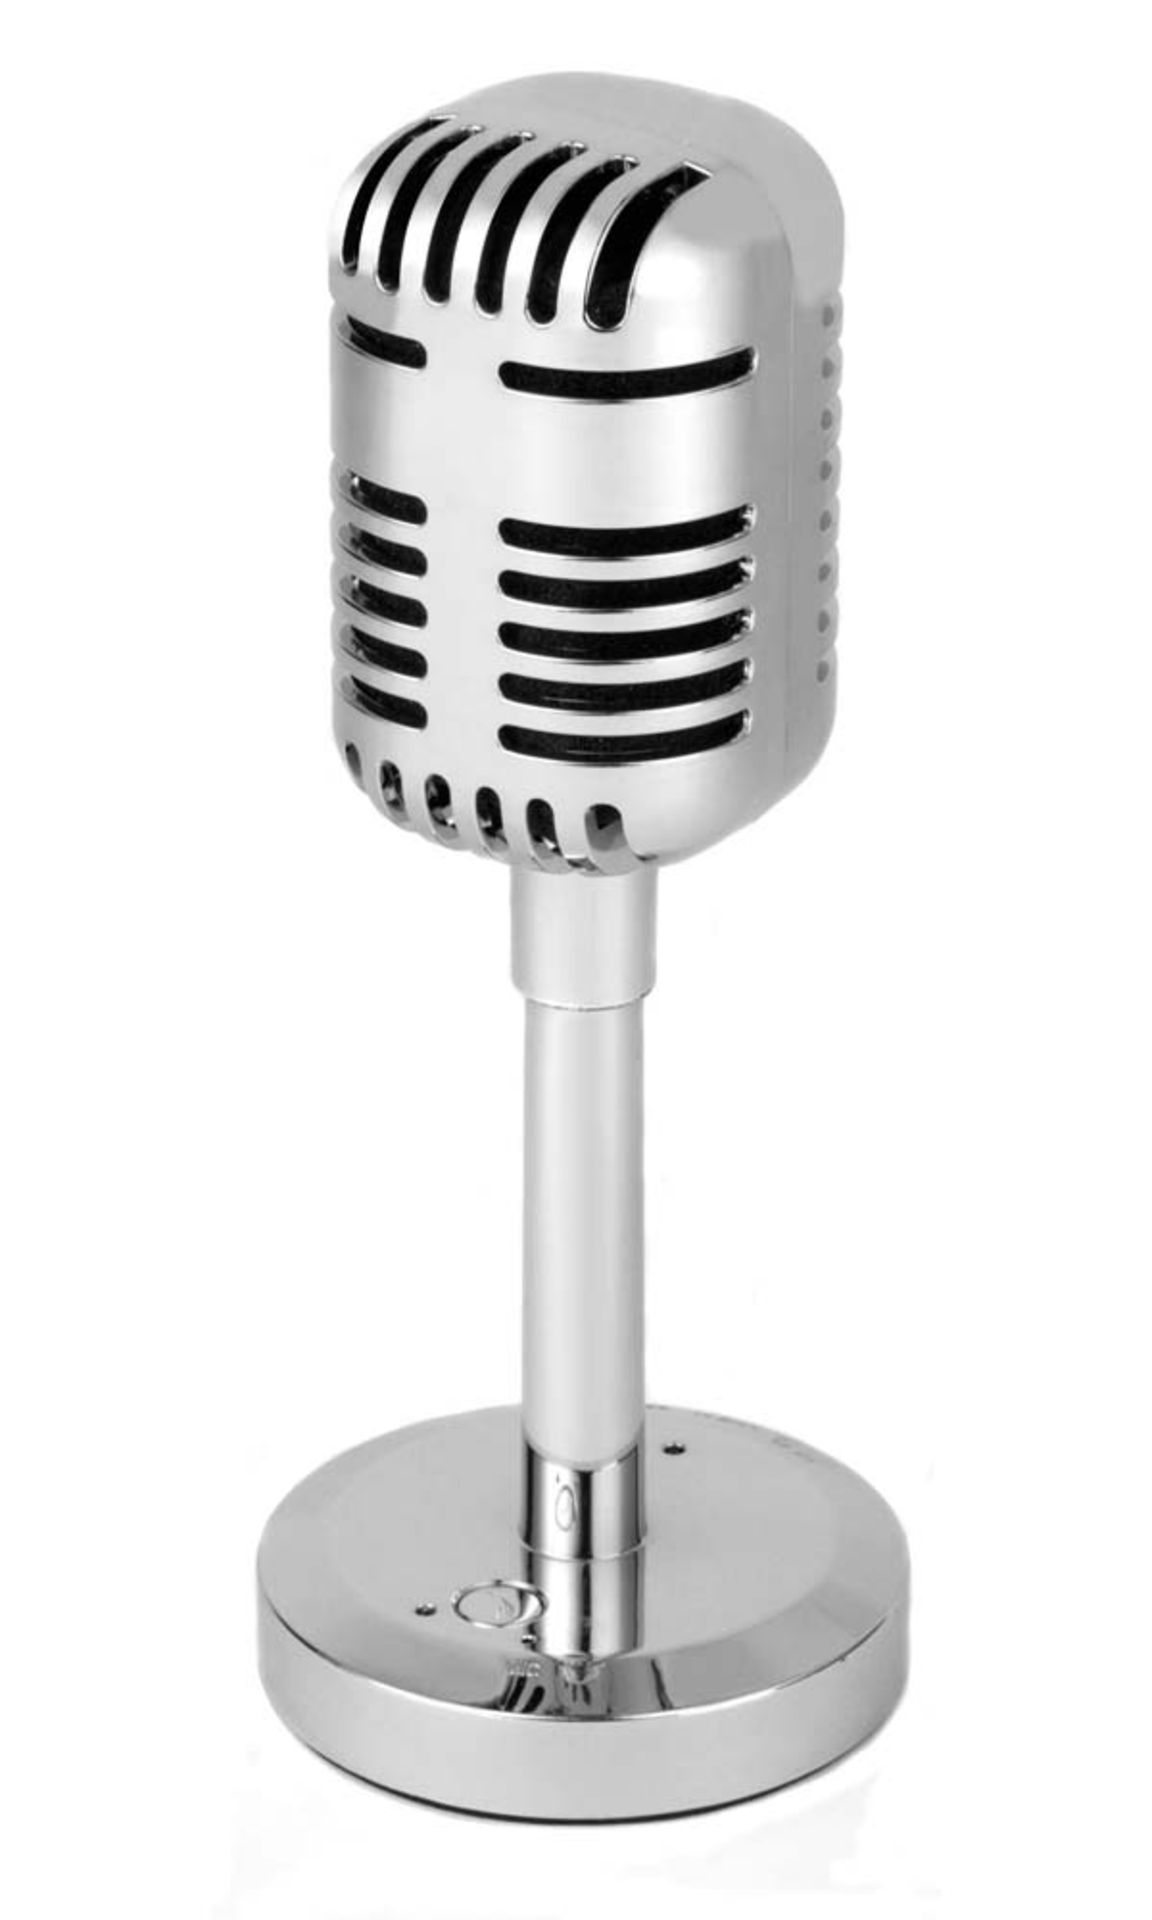 V *TRADE QTY* Brand New Intempo Portable Microphone Speaker -Bluetooth - Built-In Microphone - - Image 2 of 2